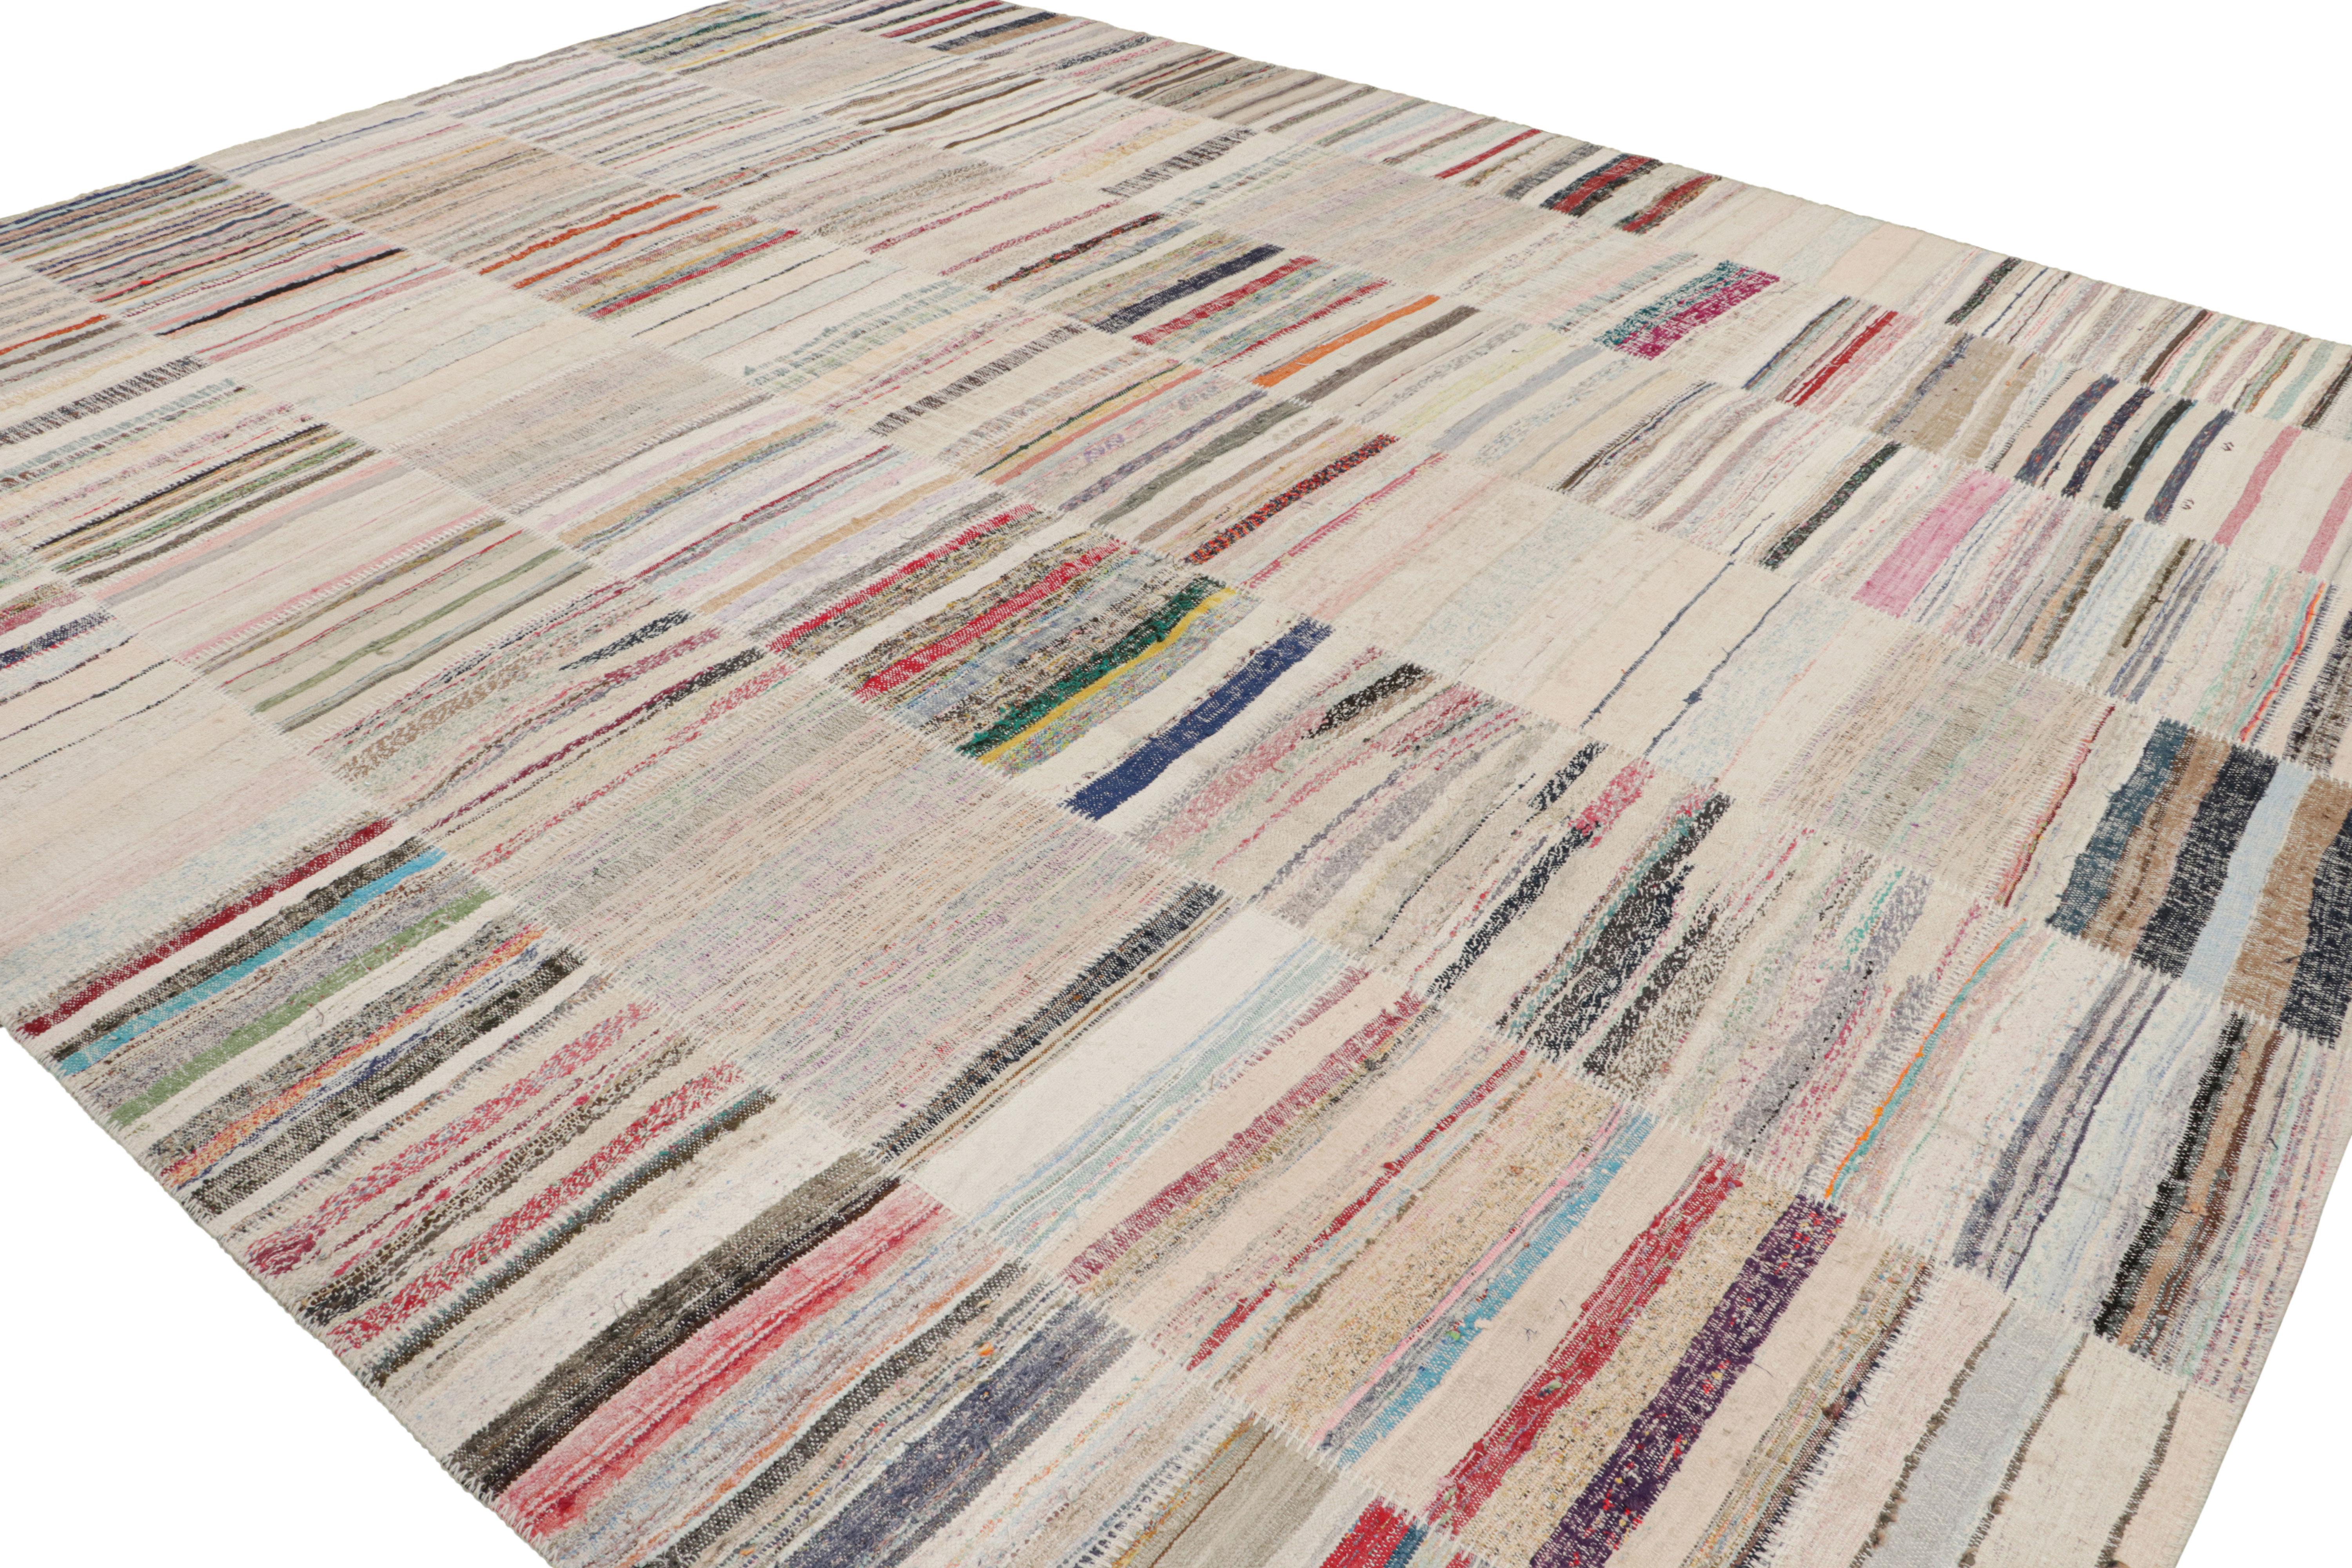 Handwoven in a wool flat-weave utilizing vintage yarns, this modern Kilim rug from Rug & Kilim’s Patchwork Kilim rug collection marries inspiration from midcentury Kilim rugs with a whimsical spectrum of red, blue, pink, green, and other colorways